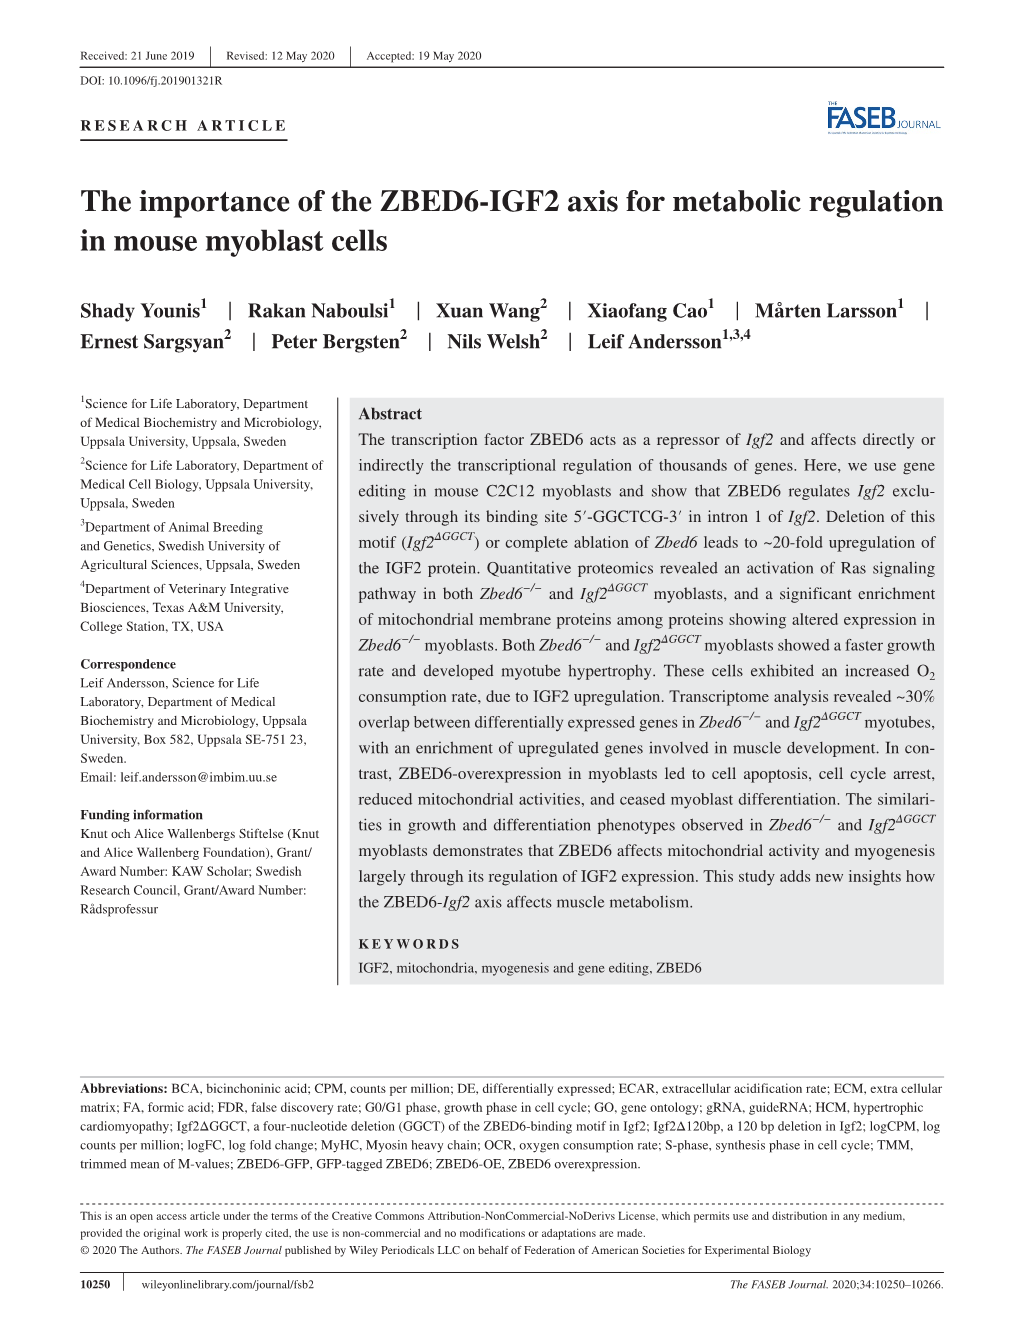 The Importance of the ZBED6‐IGF2 Axis for Metabolic Regulation In